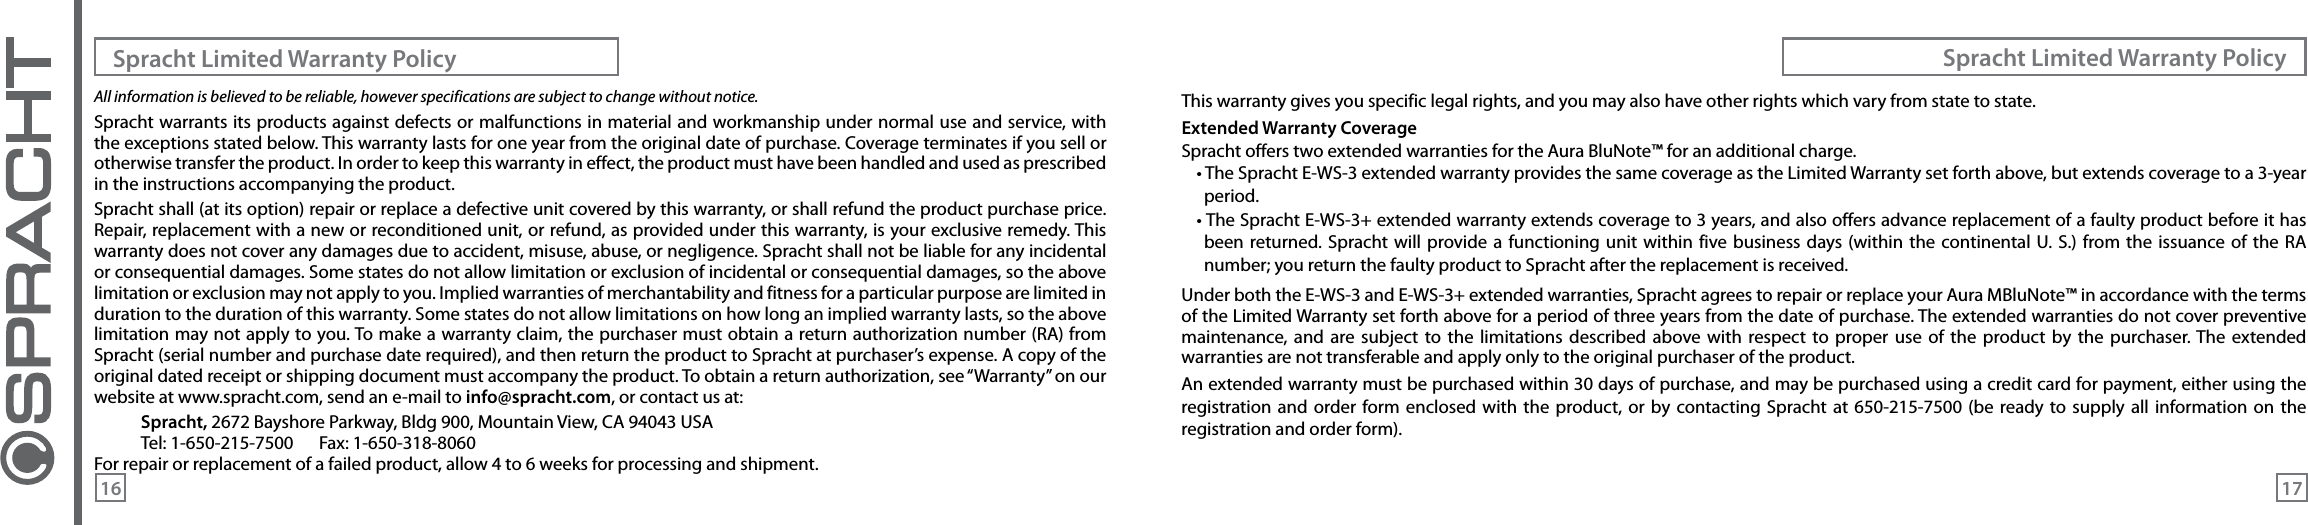 All information is believed to be reliable, however specifications are subject to change without notice.Spracht warrants its products against defects or malfunctions in material and workmanship under normal use and service, with the exceptions stated below. This warranty lasts for one year from the original date of purchase. Coverage terminates if you sell or otherwise transfer the product. In order to keep this warranty in effect, the product must have been handled and used as prescribed in the instructions accompanying the product.Spracht shall (at its option) repair or replace a defective unit covered by this warranty, or shall refund the product purchase price. Repair, replacement with a new or reconditioned unit, or refund, as provided under this warranty, is your exclusive remedy. This warranty does not cover any damages due to accident, misuse, abuse, or negligence. Spracht shall not be liable for any incidental or consequential damages. Some states do not allow limitation or exclusion of incidental or consequential damages, so the above limitation or exclusion may not apply to you. Implied warranties of merchantability and fitness for a particular purpose are limited in duration to the duration of this warranty. Some states do not allow limitations on how long an implied warranty lasts, so the above limitation may not apply to you. To make a warranty claim, the purchaser must obtain a return authorization number (RA) from Spracht (serial number and purchase date required), and then return the product to Spracht at purchaser’s expense. A copy of the original dated receipt or shipping document must accompany the product. To obtain a return authorization, see “Warranty” on our website at www.spracht.com, send an e-mail to info@spracht.com, or contact us at:Spracht, 2672 Bayshore Parkway, Bldg 900, Mountain View, CA 94043 USATel: 1-650-215-7500  Fax: 1-650-318-8060For repair or replacement of a failed product, allow 4 to 6 weeks for processing and shipment.This warranty gives you specific legal rights, and you may also have other rights which vary from state to state.Extended Warranty CoverageSpracht offers two extended warranties for the Aura BluNote™ for an additional charge.• The Spracht E-WS-3 extended warranty provides the same coverage as the Limited Warranty set forth above, but extends coverage to a 3-year period.• The Spracht E-WS-3+ extended warranty extends coverage to 3 years, and also offers advance replacement of a faulty product before it has been returned.  Spracht will  provide a functioning unit within  five  business days (within  the  continental U. S.)  from the issuance  of  the  RA number; you return the faulty product to Spracht after the replacement is received.Under both the E-WS-3 and E-WS-3+ extended warranties, Spracht agrees to repair or replace your Aura MBluNote™ in accordance with the terms of the Limited Warranty set forth above for a period of three years from the date of purchase. The extended warranties do not cover preventive maintenance,  and  are  subject  to  the  limitations described  above  with  respect  to proper  use of  the product  by  the  purchaser. The  extended warranties are not transferable and apply only to the original purchaser of the product.An extended warranty must be purchased within 30 days of purchase, and may be purchased using a credit card for payment, either using the registration and  order  form enclosed with the  product,  or  by  contacting  Spracht  at 650-215-7500  (be  ready to supply  all information on the registration and order form).Spracht Limited Warranty Policy Spracht Limited Warranty Policy16 17